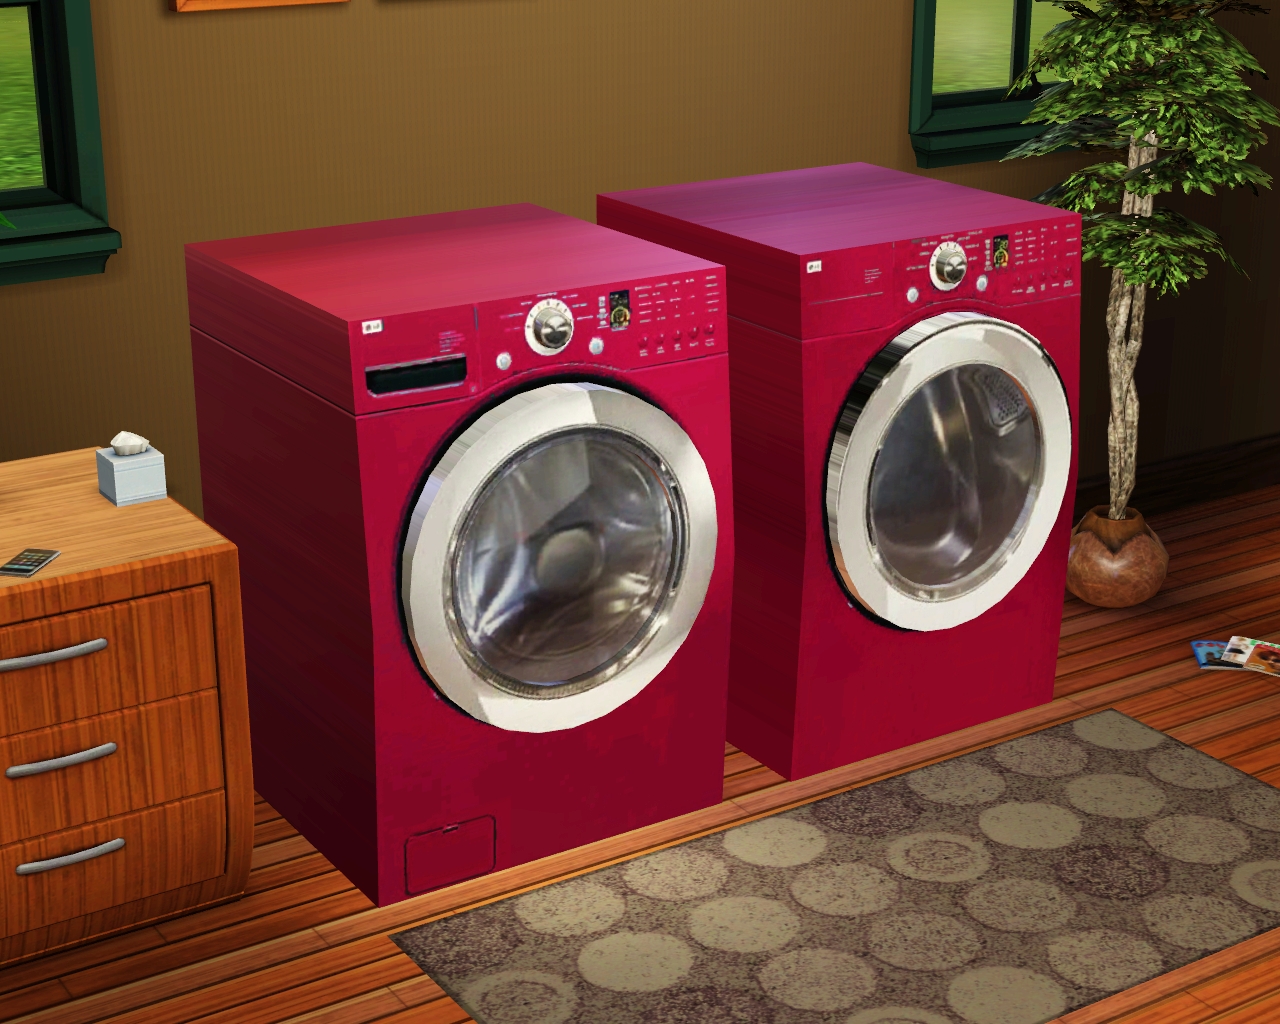 The Sims 4 Eco Living Stuff: "Laundry Group" Wins Gameplay Feature Vote